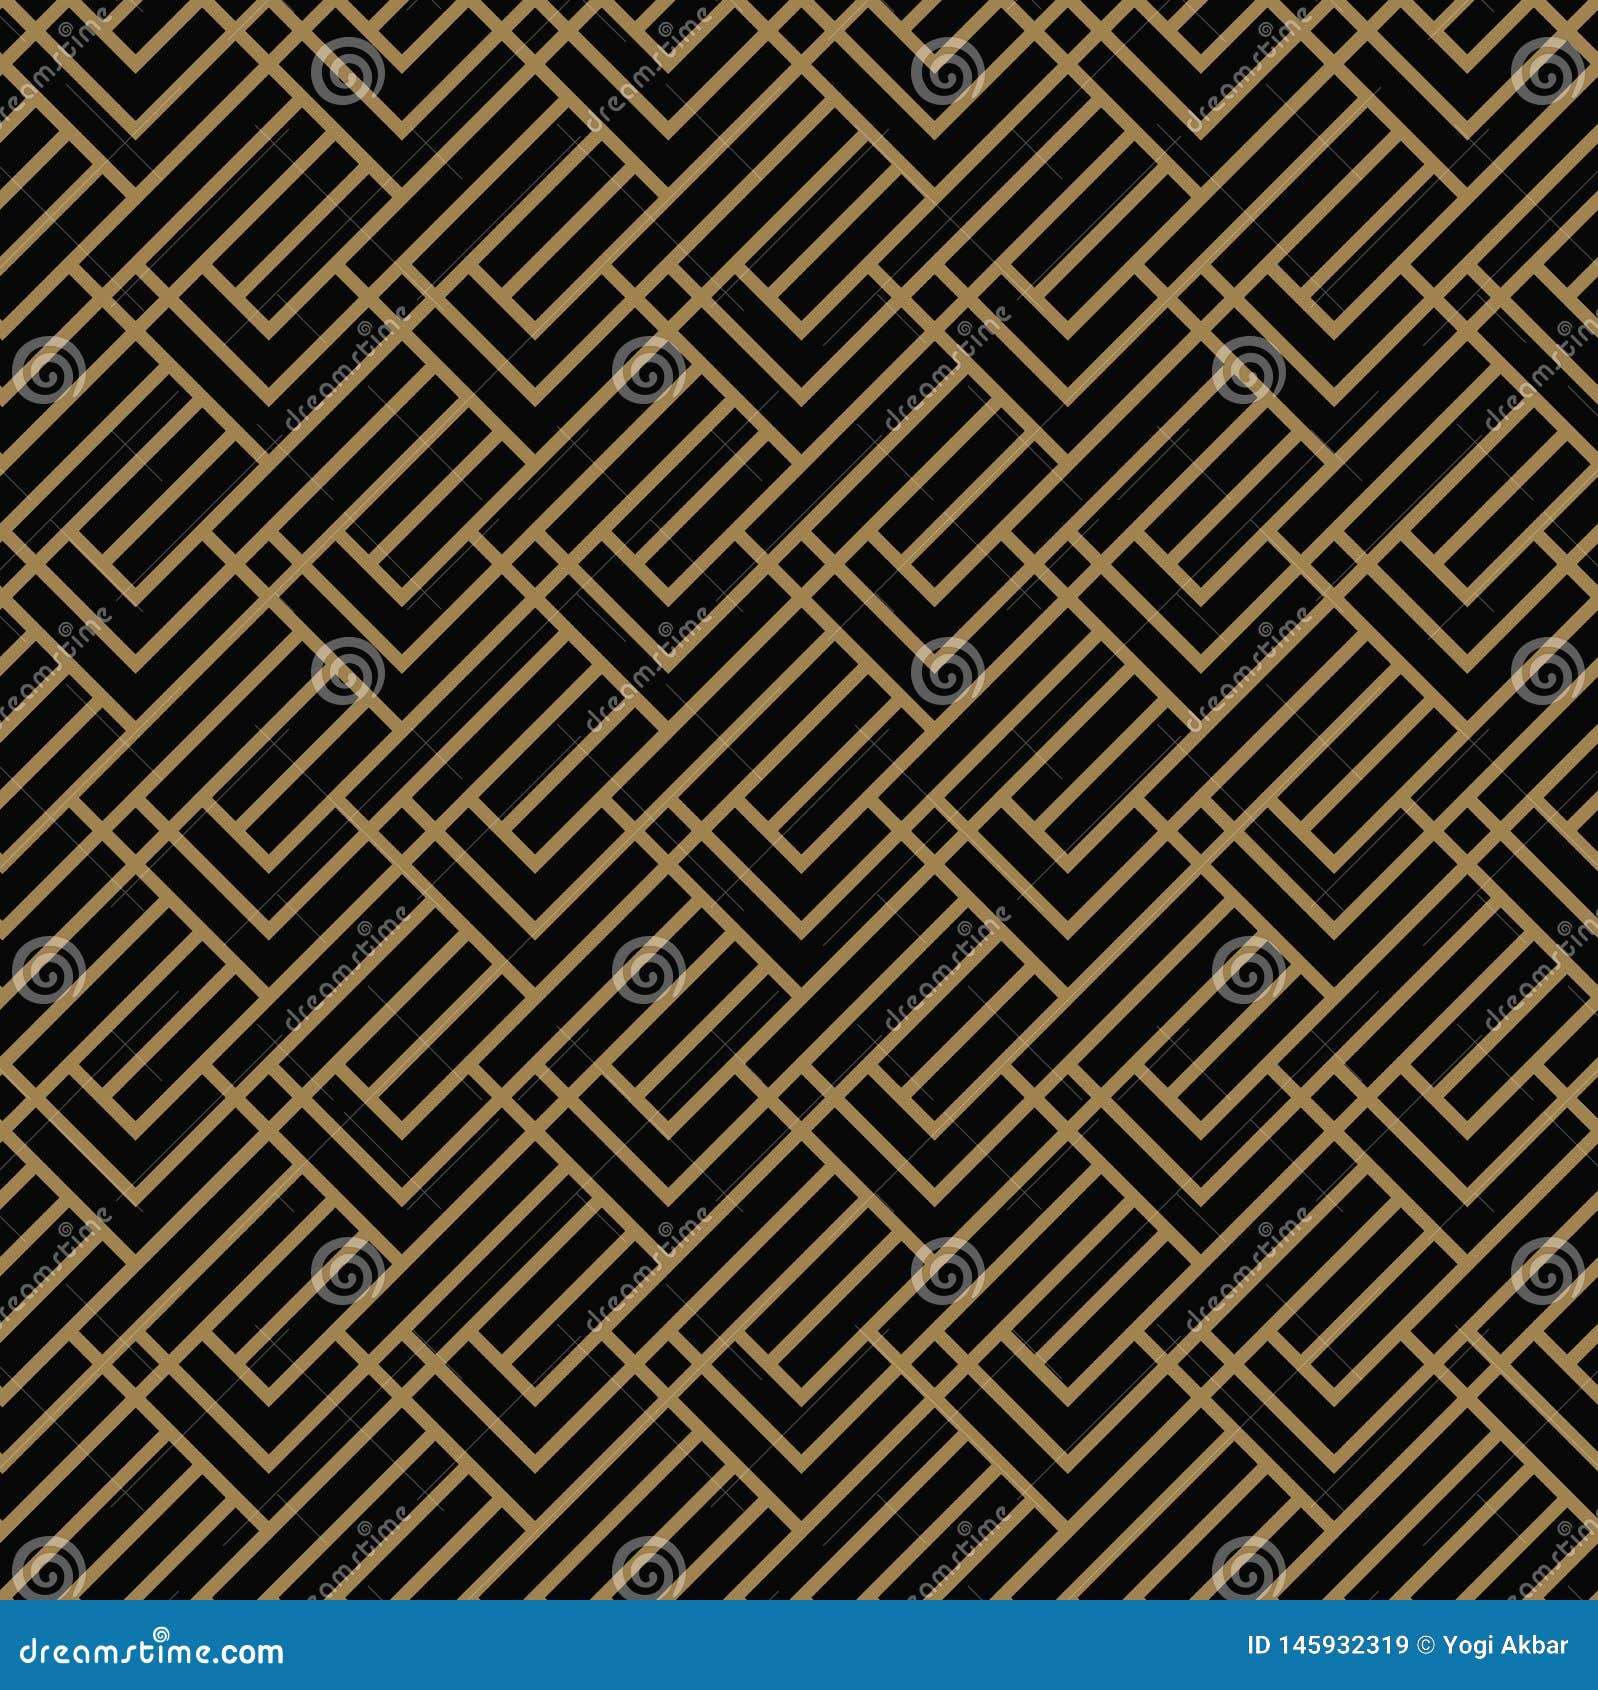 Seamless Pattern with Squares, Black Gold Diagonal Braided Striped ...